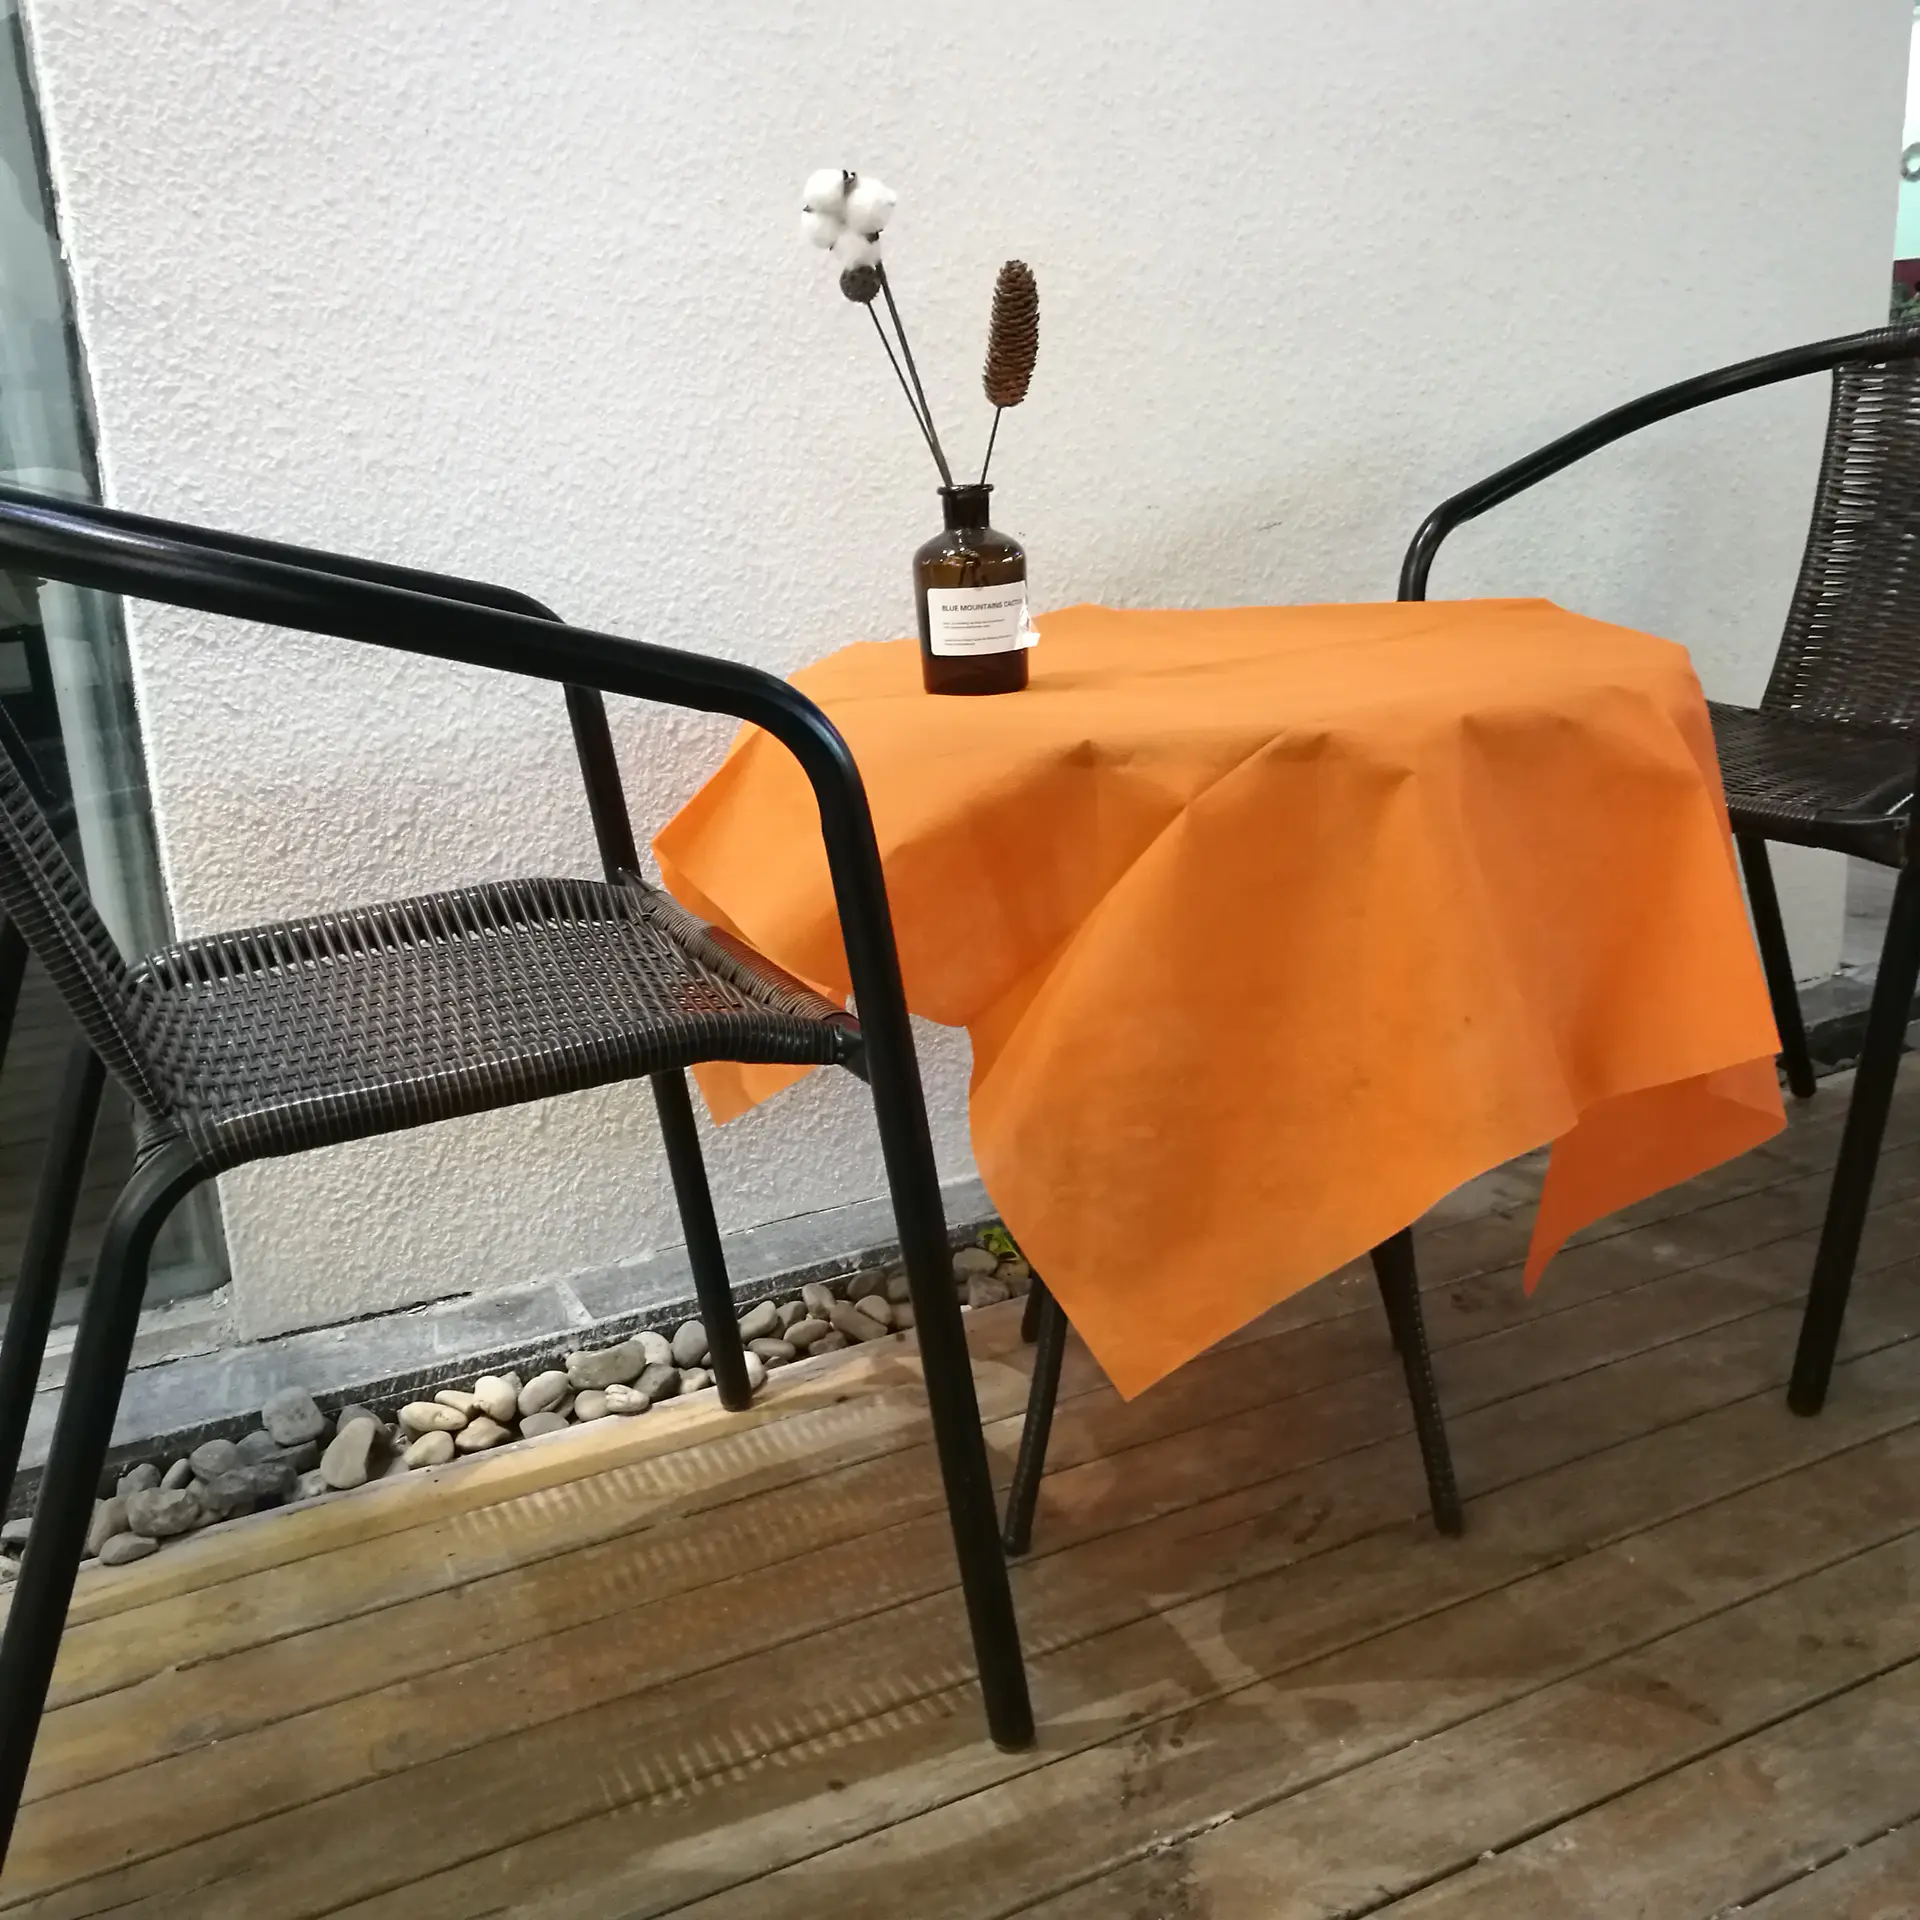 Sunshine water proof table covers